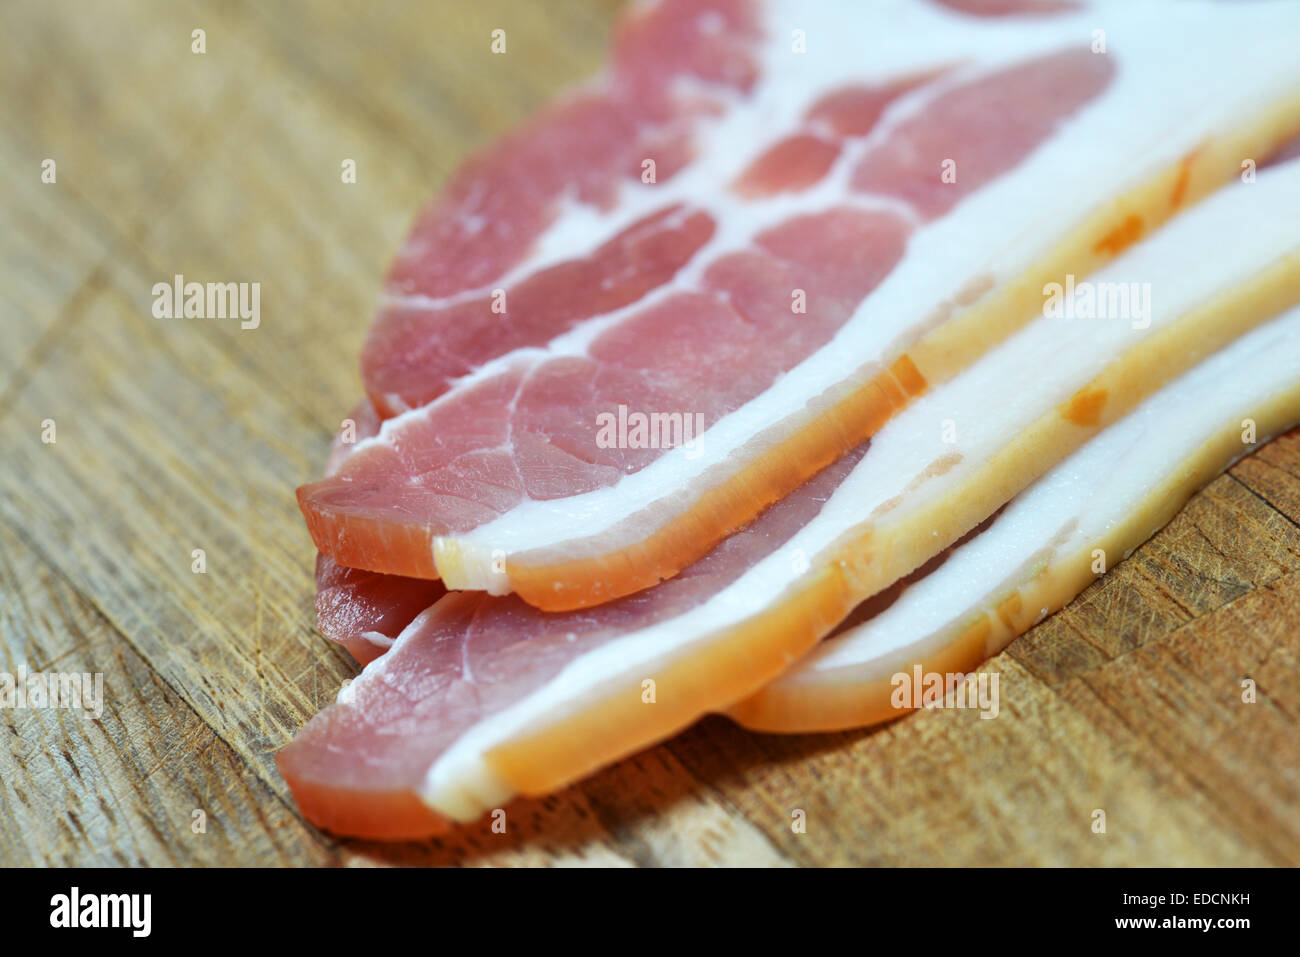 Uncooked Bacon on a chopping board Stock Photo